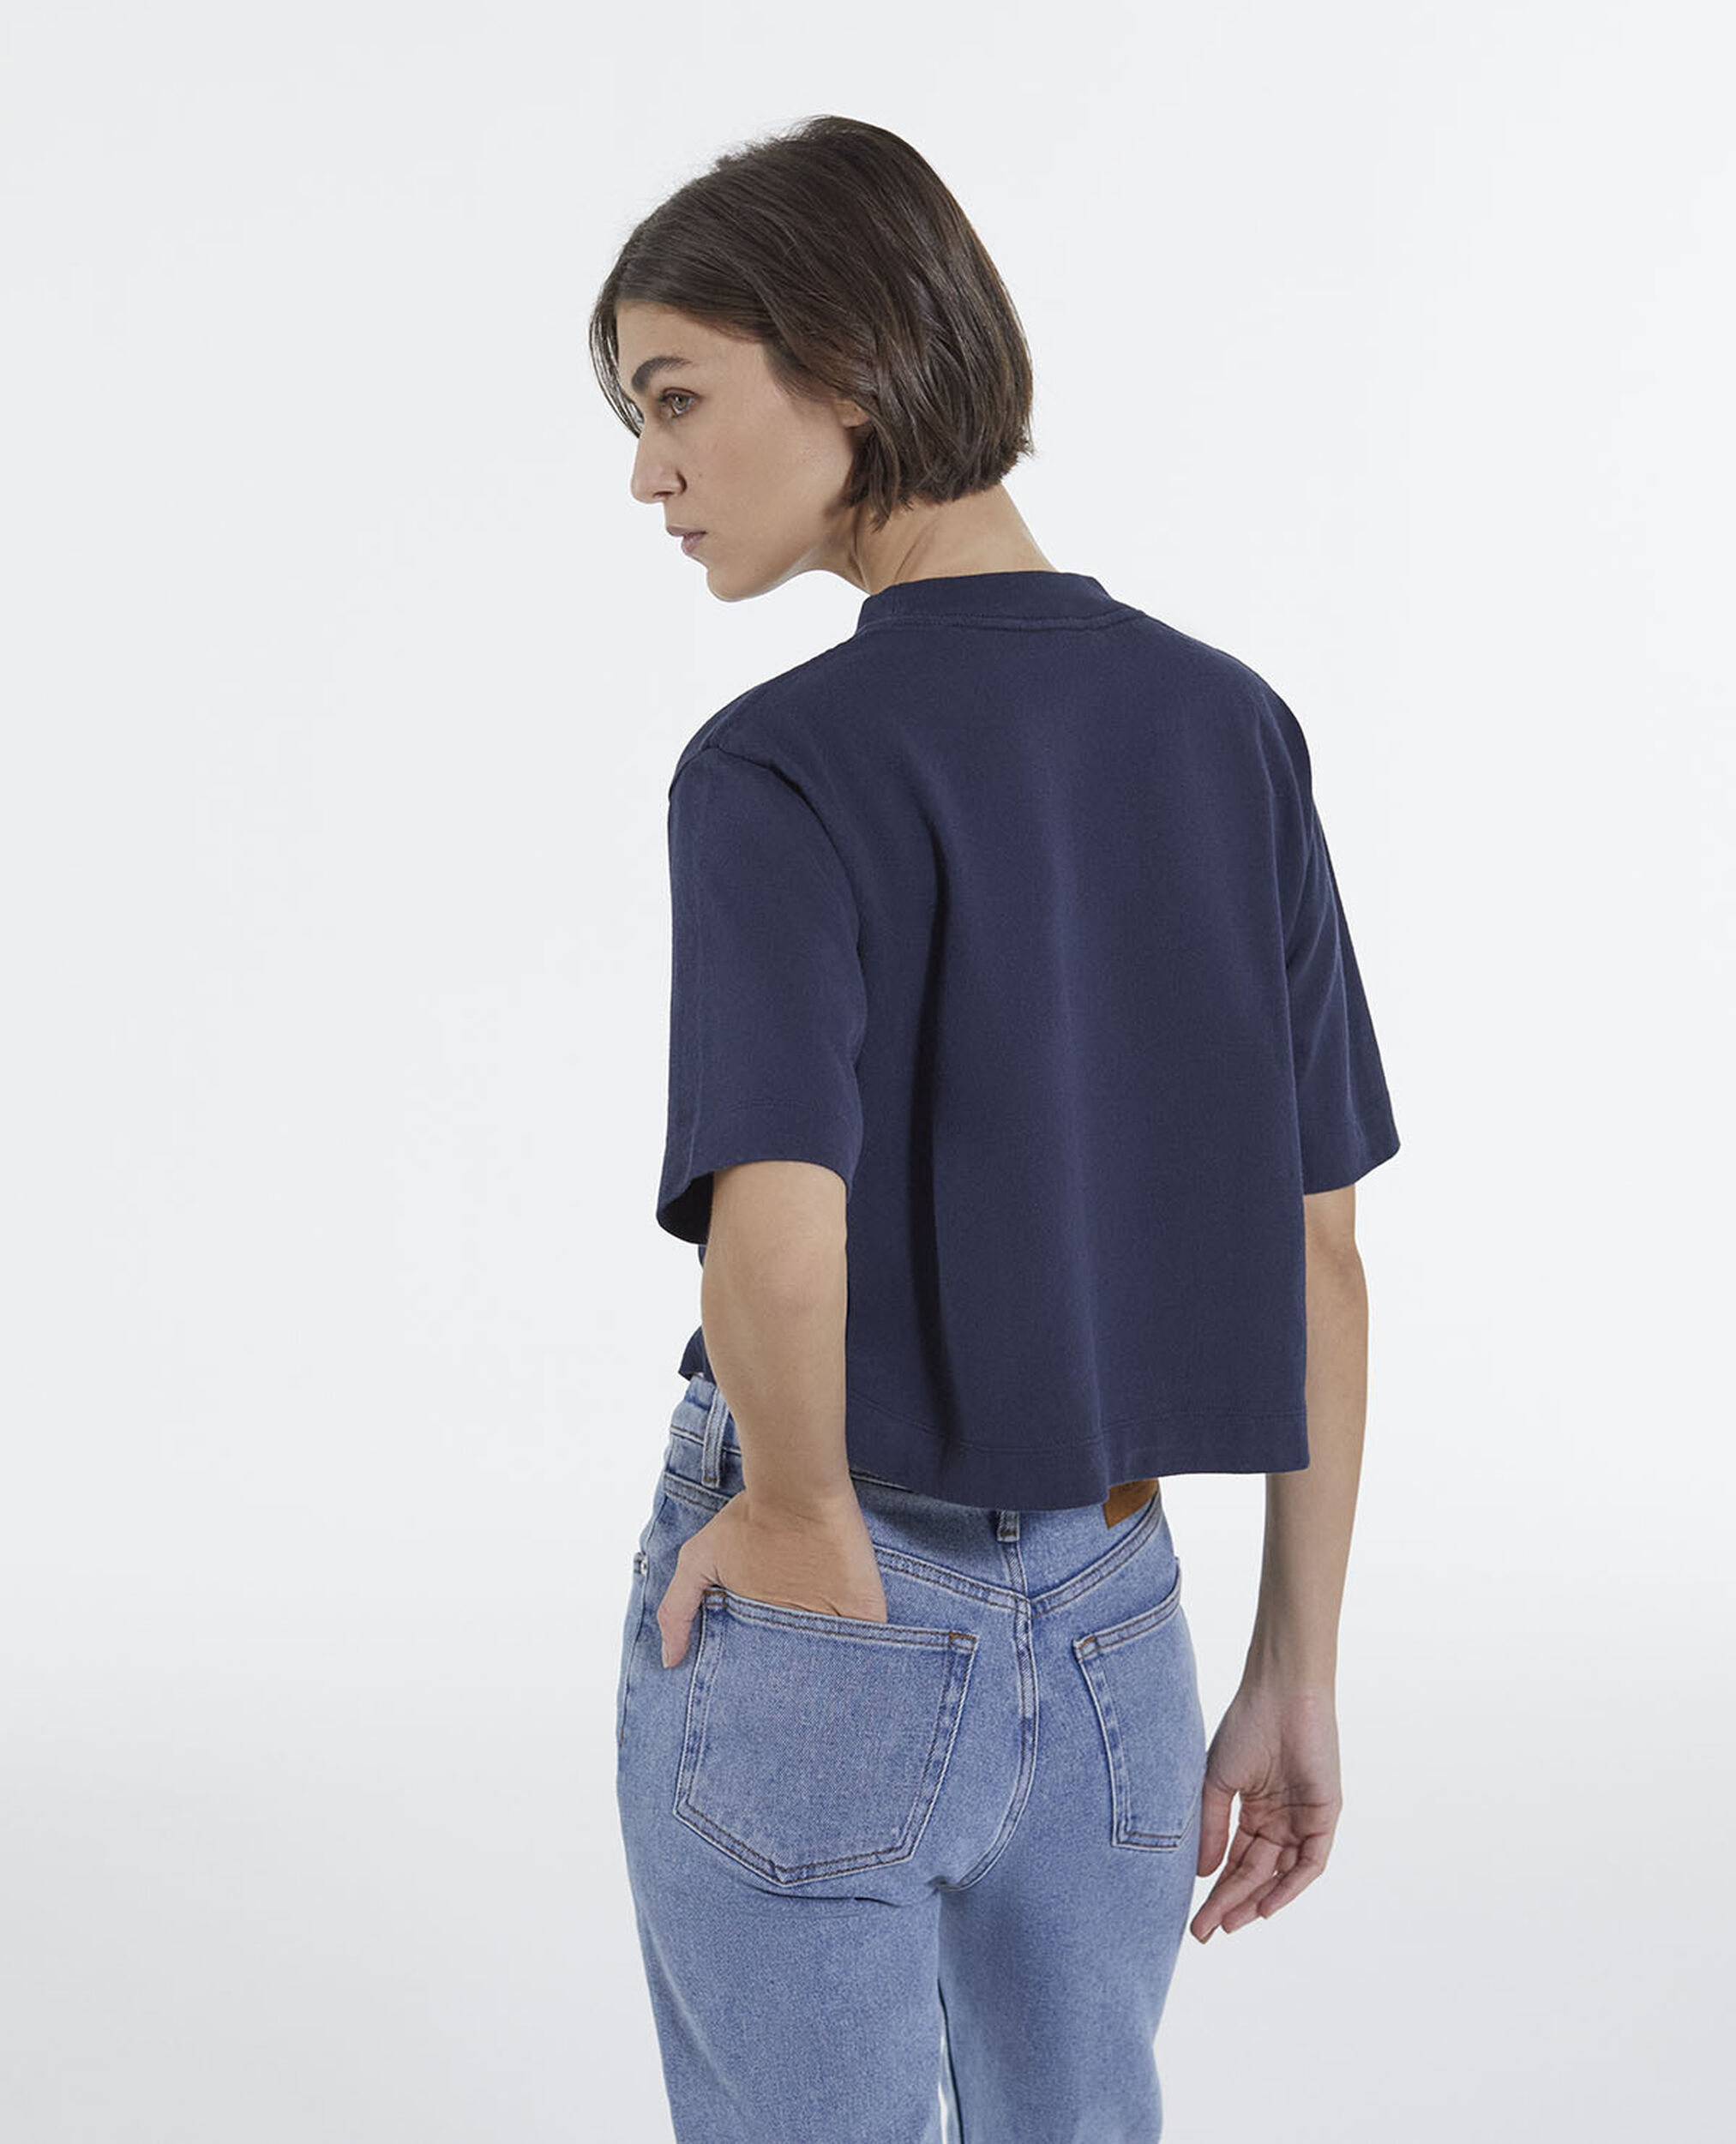 Cropped-T-Shirt, NAVY, hi-res image number null